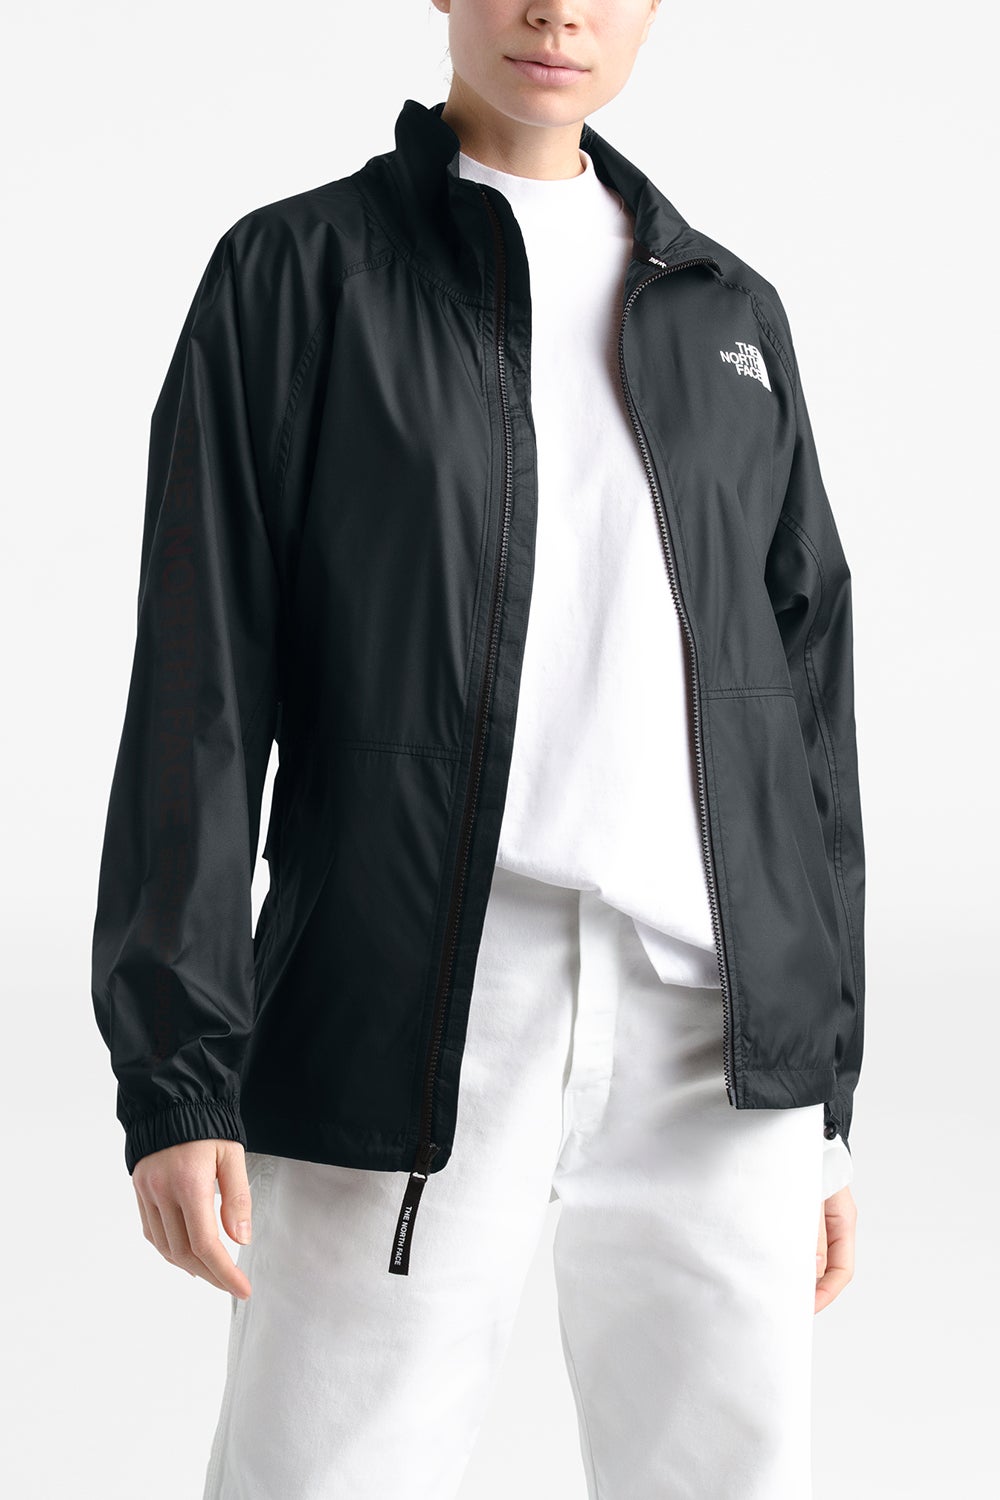 The North Face NSE Graphic Wind Jacket